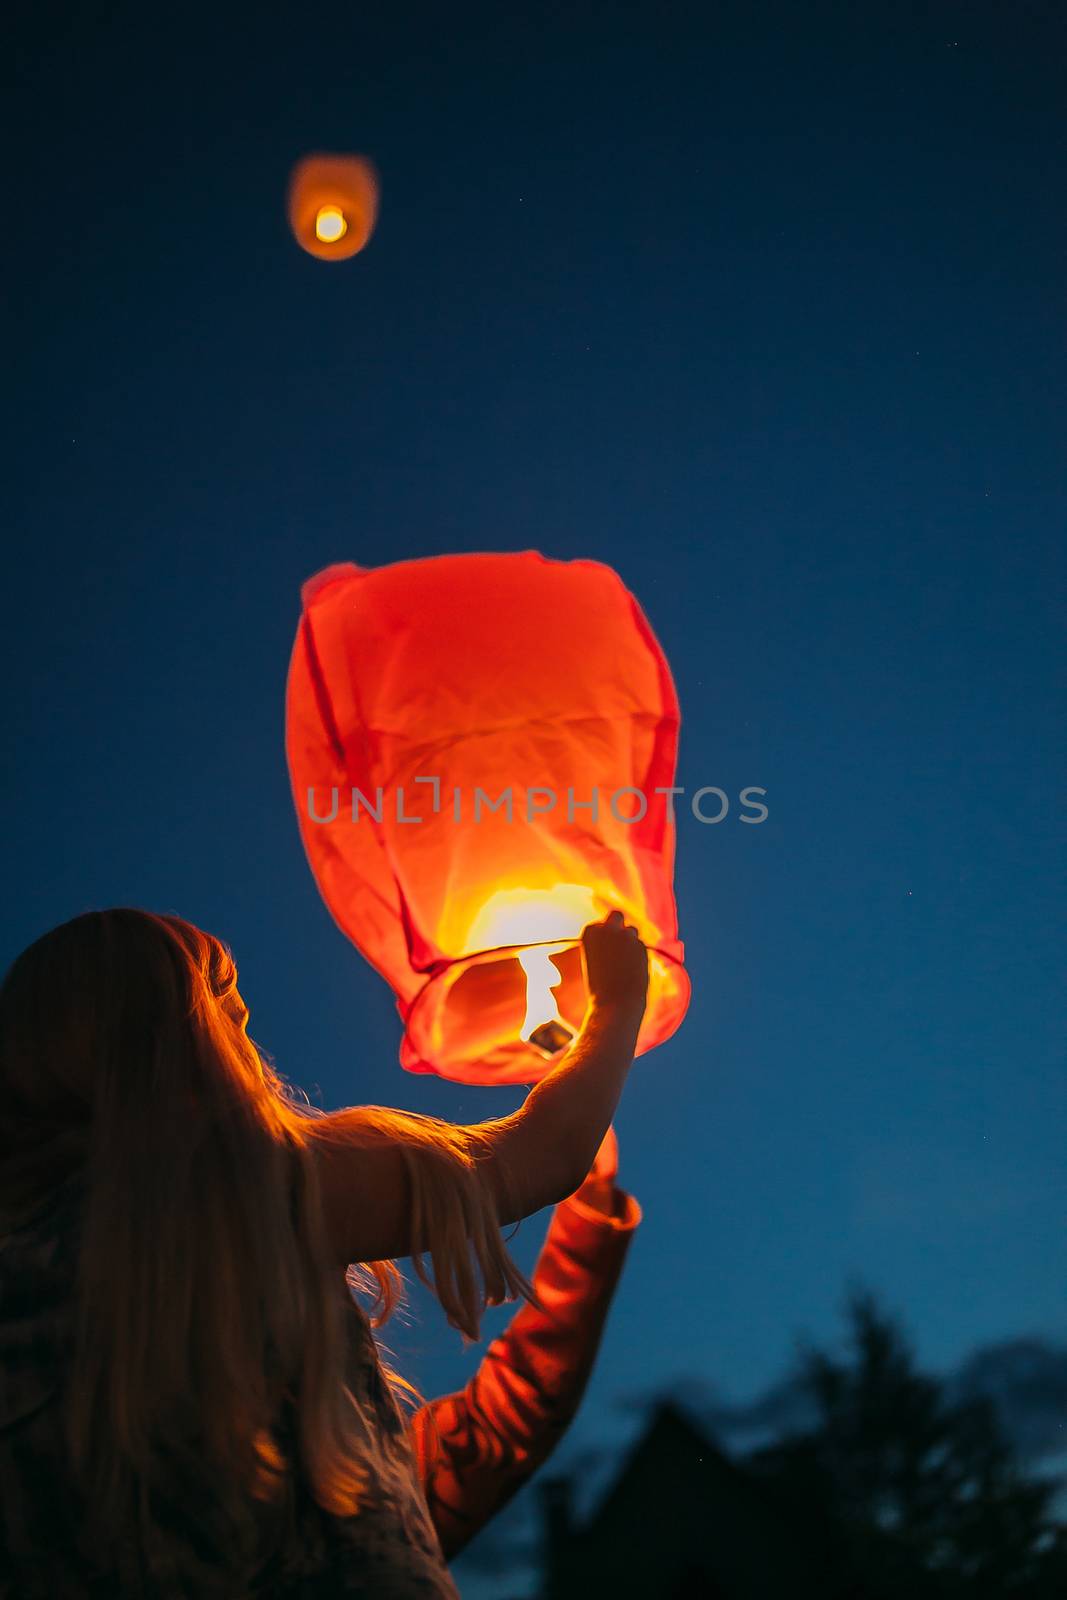 Launching Chinese lanterns at a street party